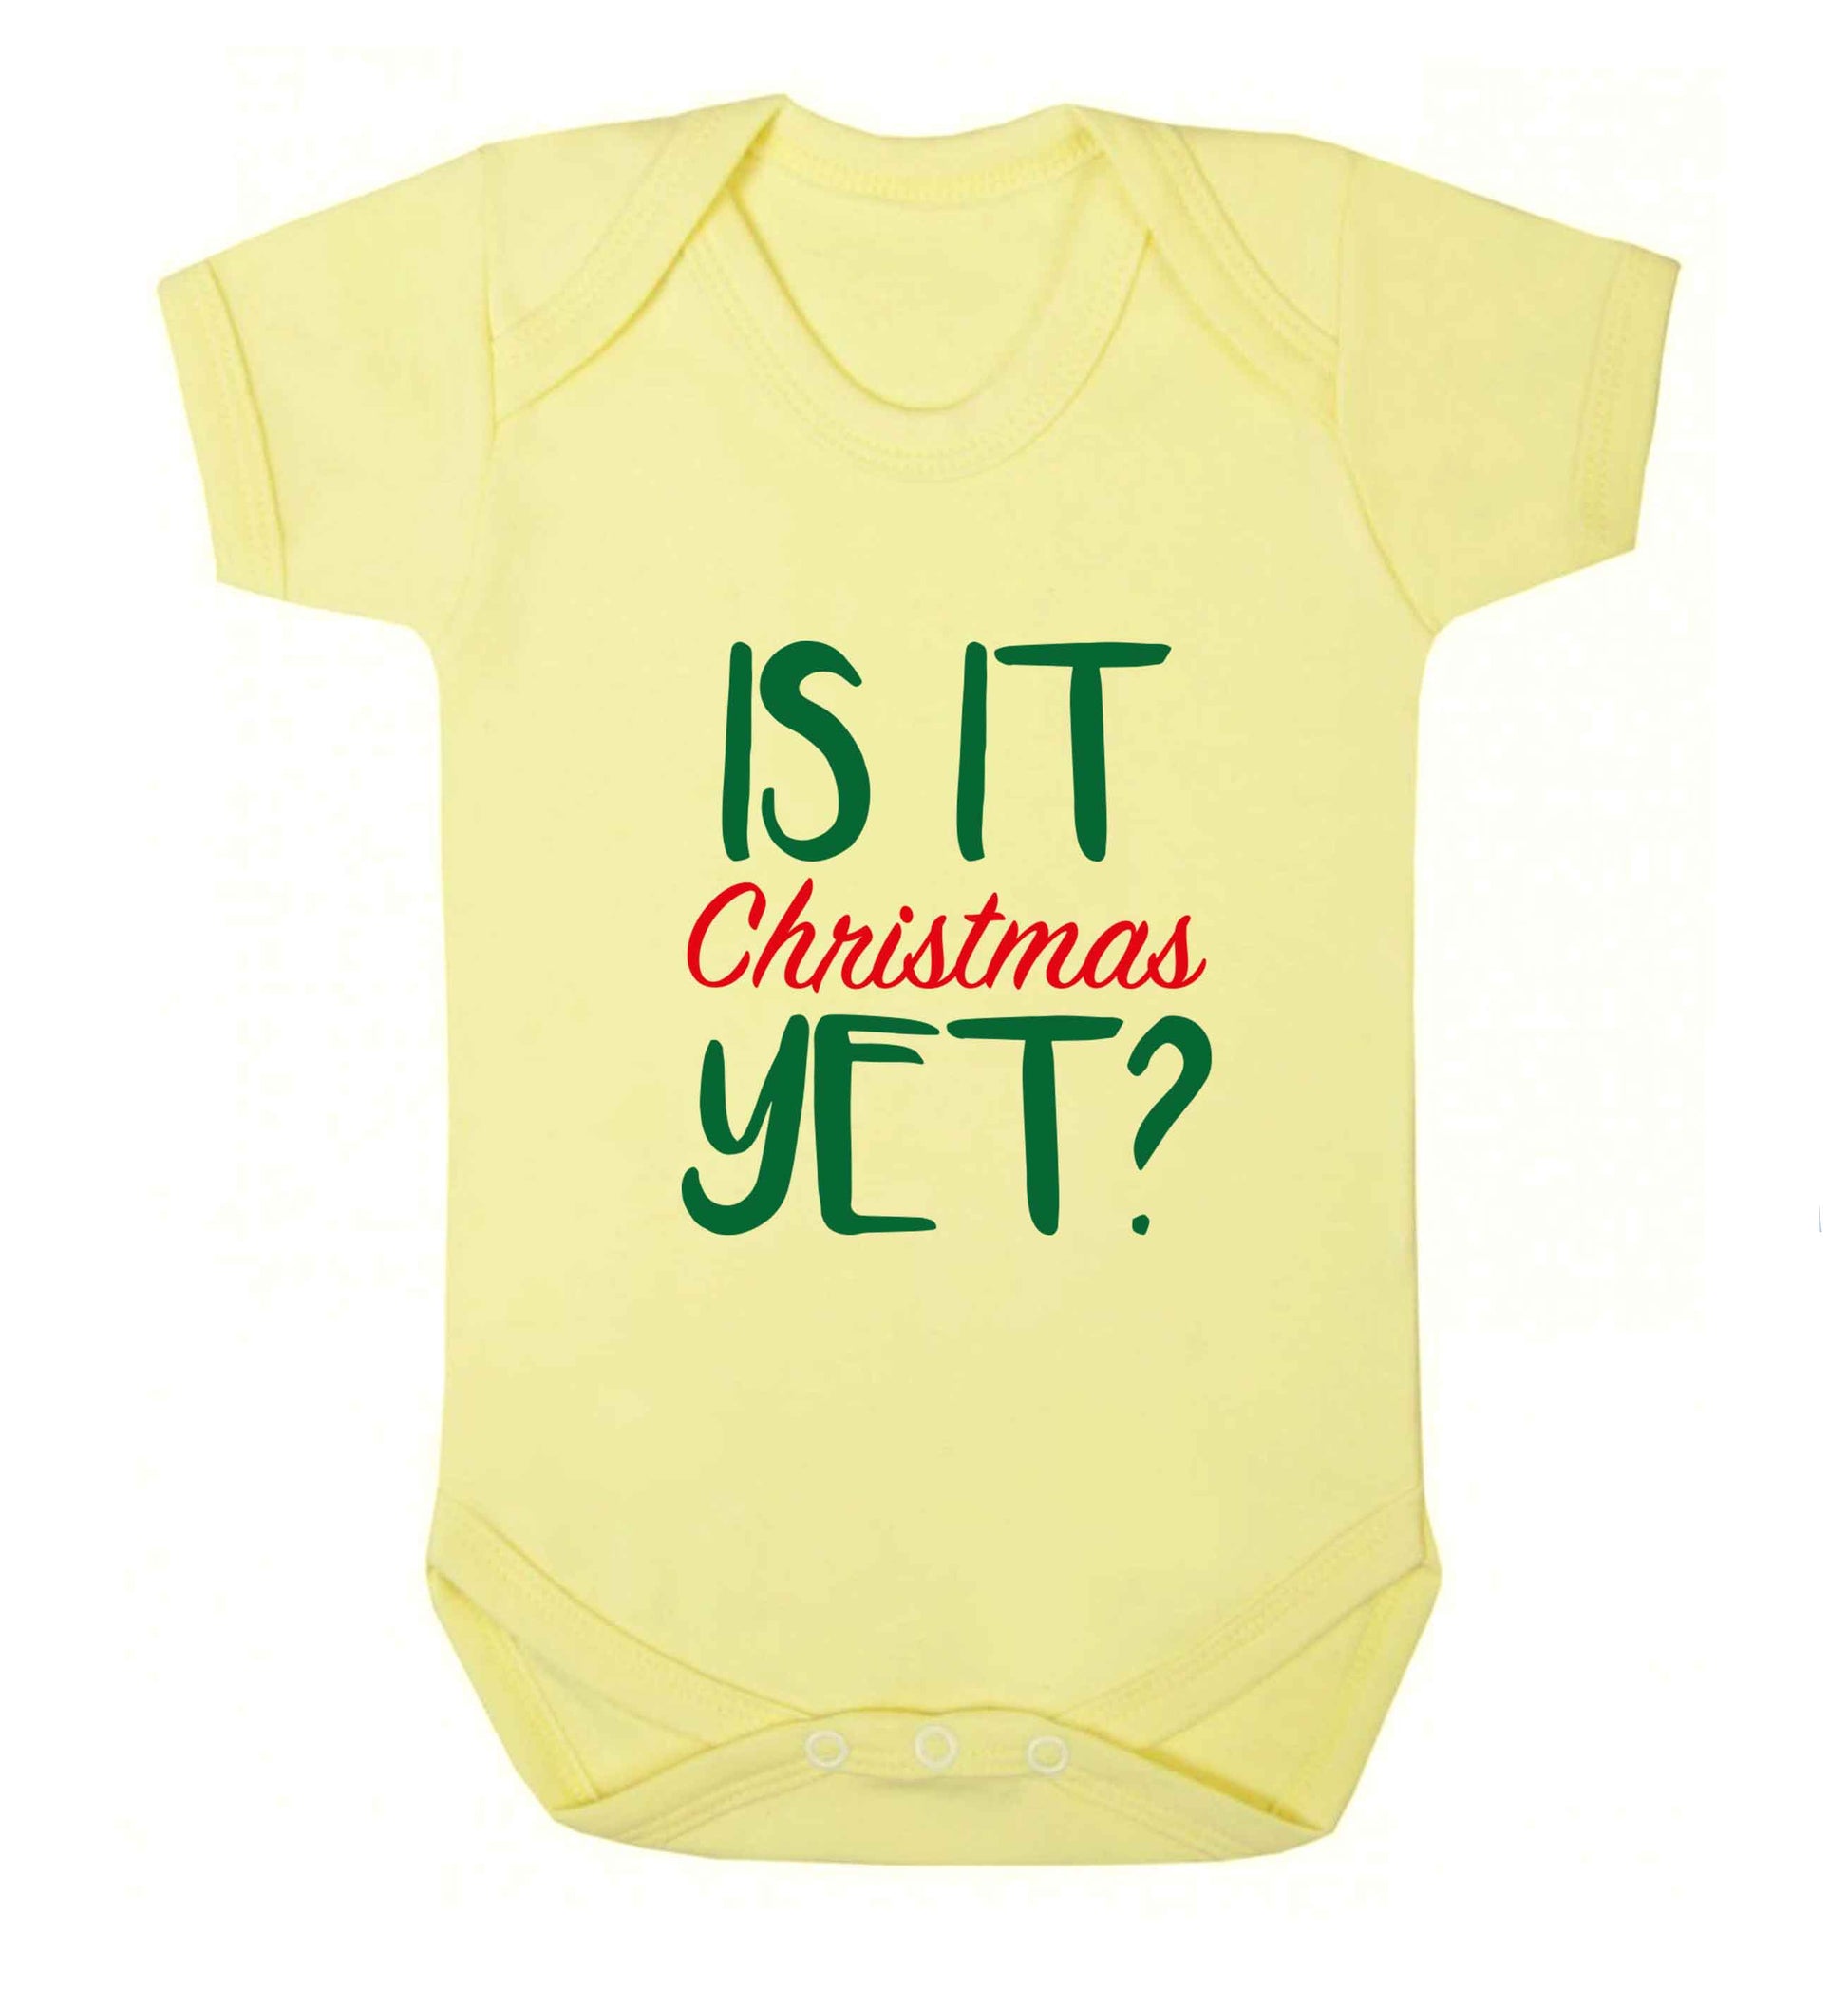 Is it Christmas yet? baby vest pale yellow 18-24 months